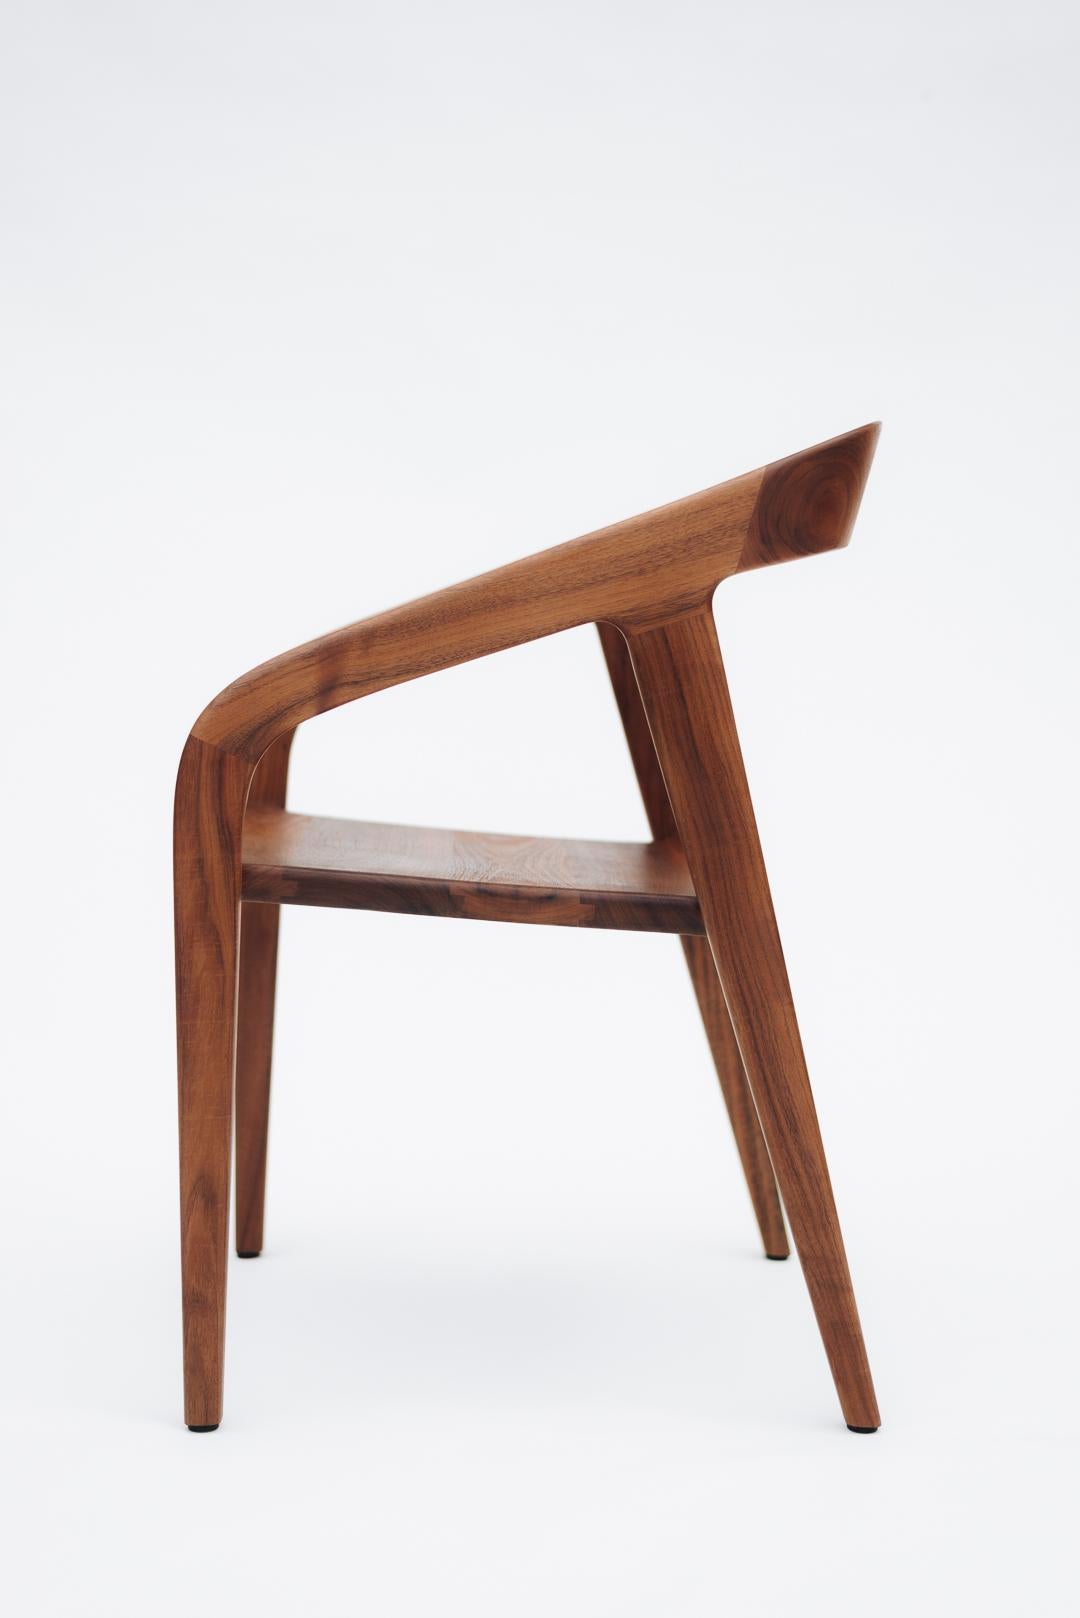 Mexican Handrafted Contemporary Dining Chair in Caribbean Walnut, in Stock For Sale